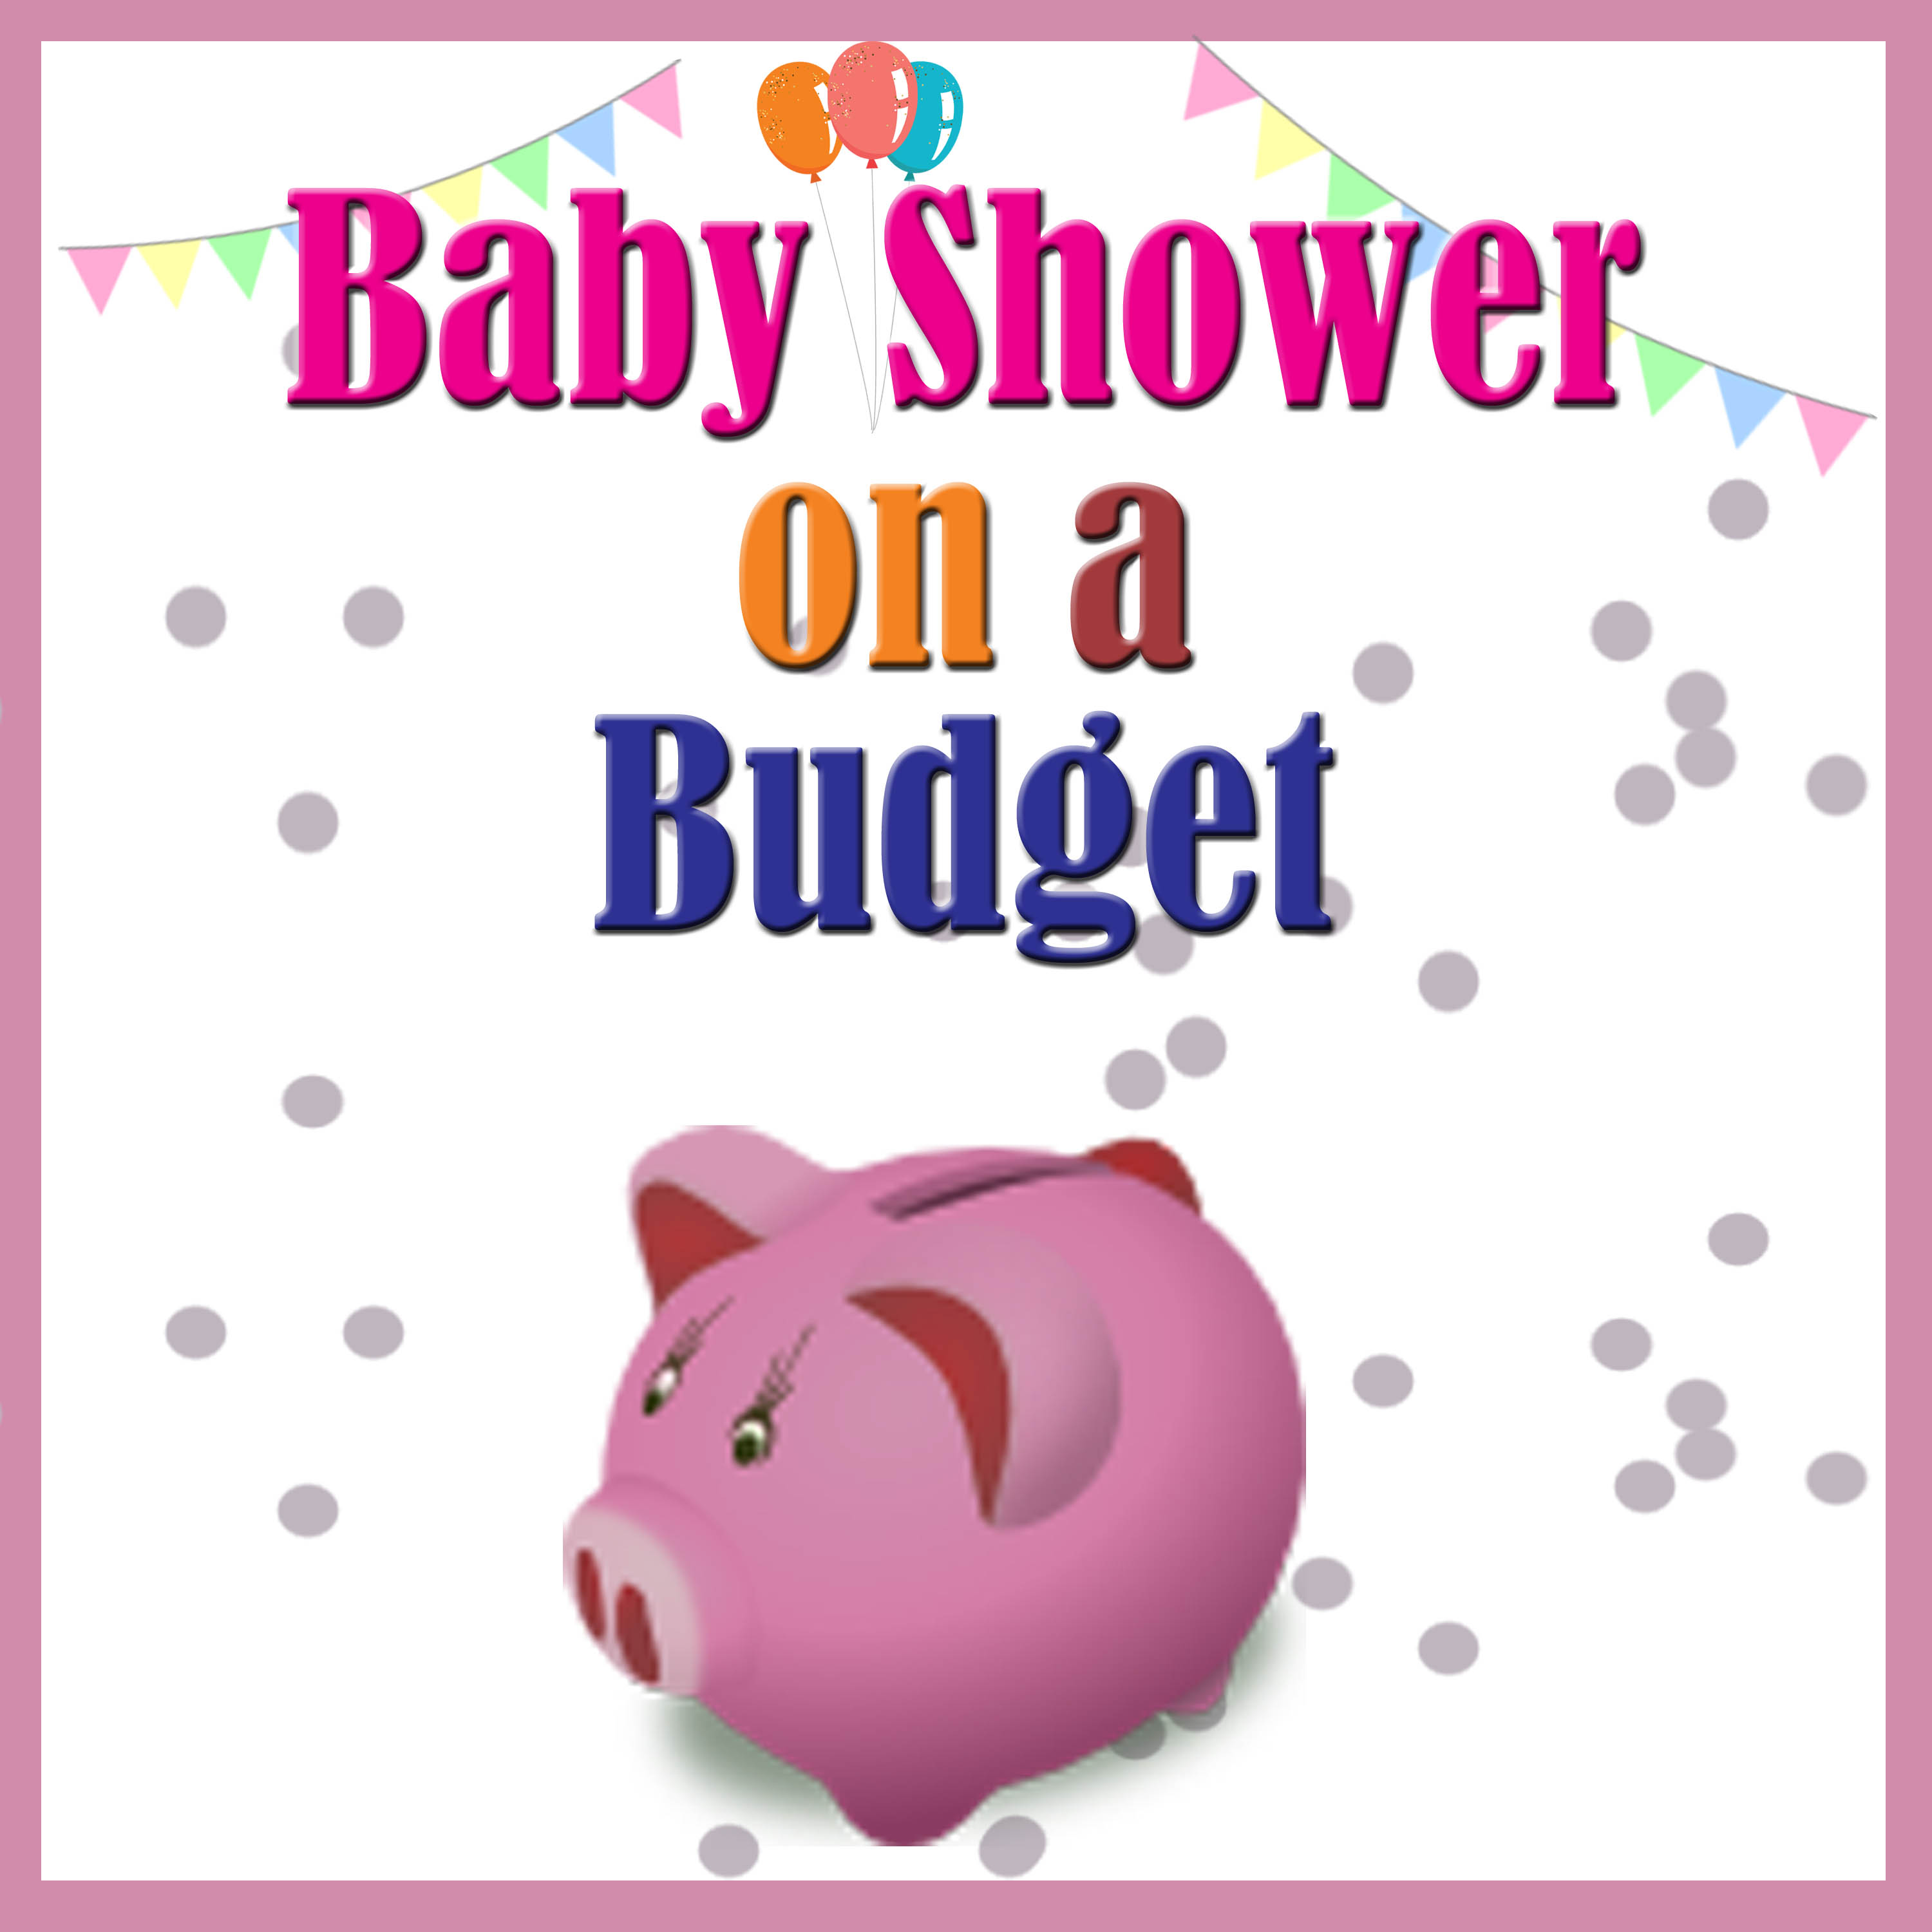 Sticking to a baby shower budget is the best way to control spending. Here are some tips and advice for planning a baby shower on a budget.